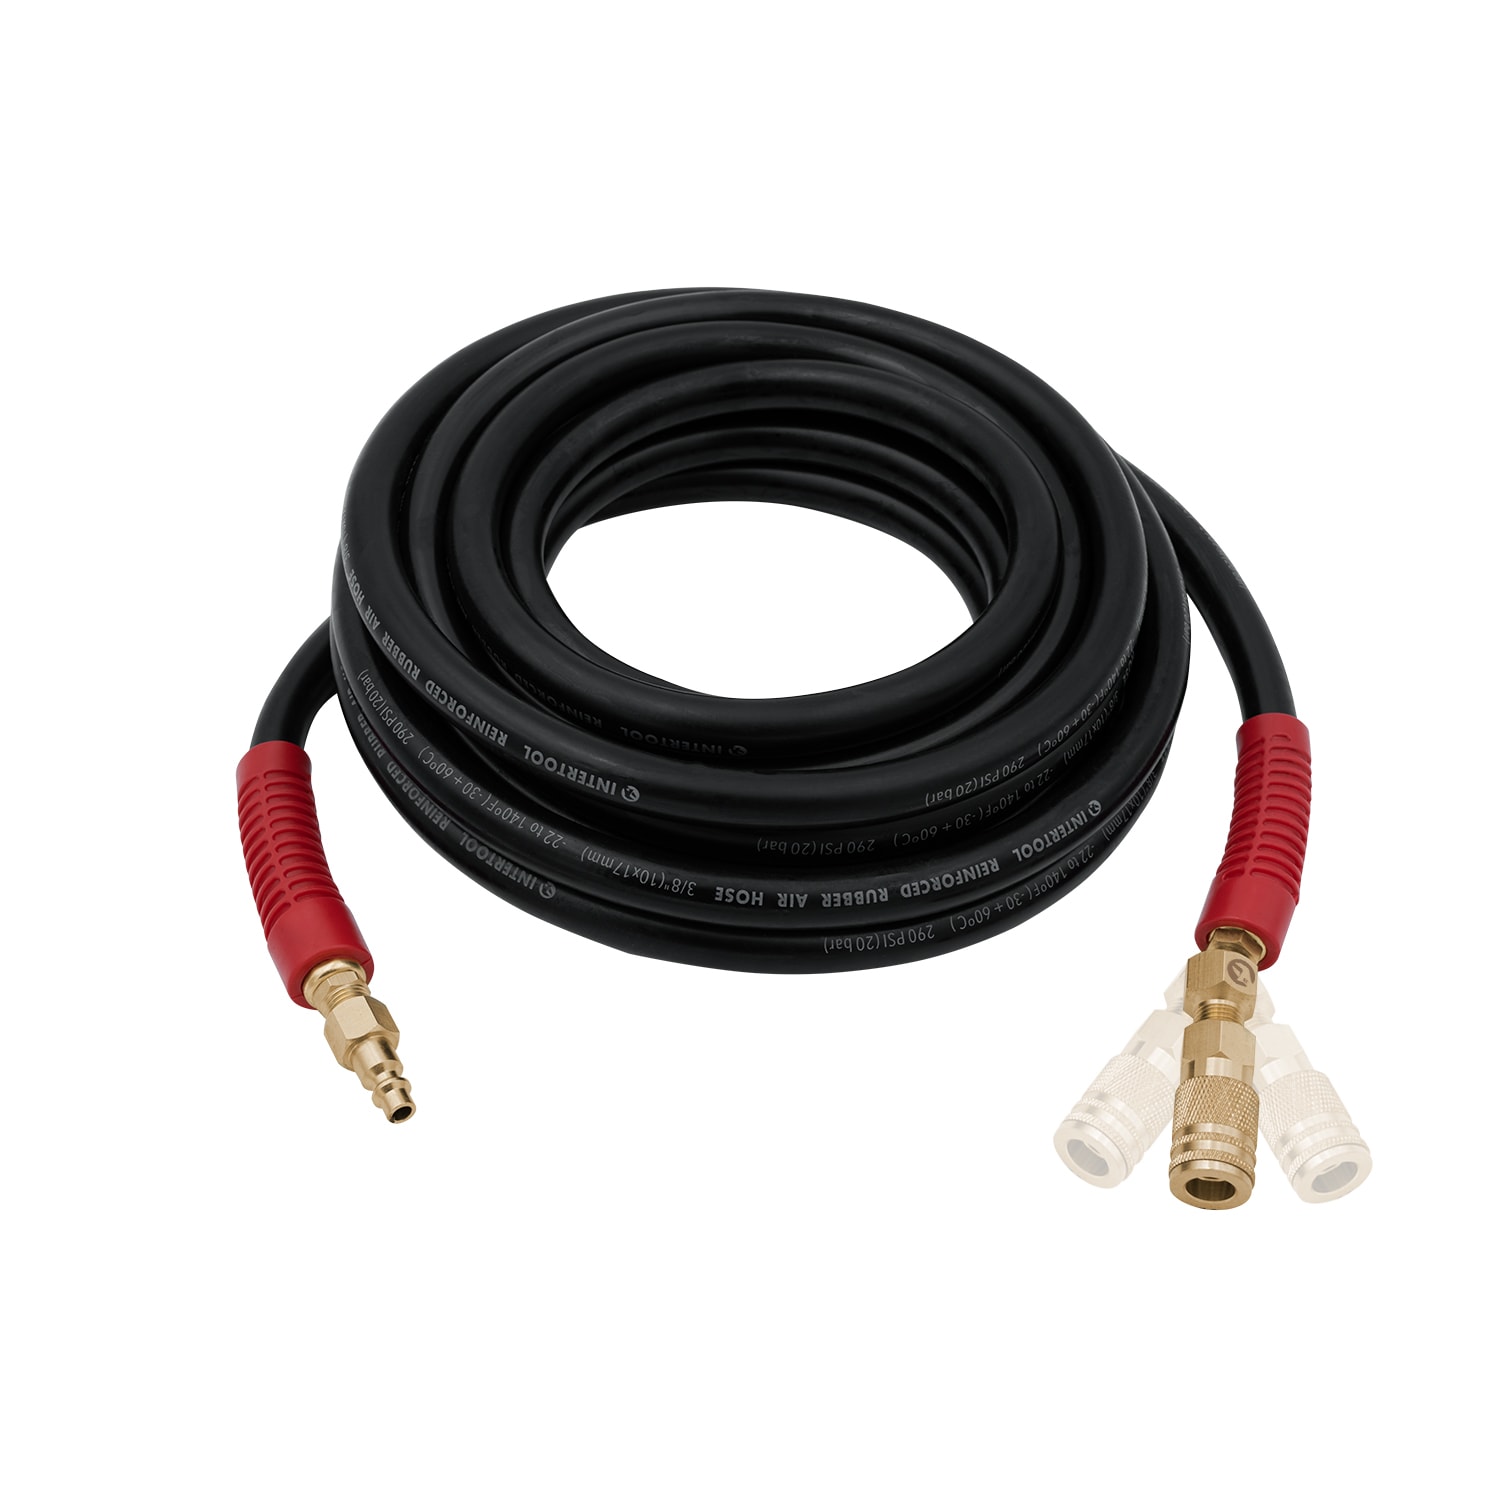 INTERTOOL 3/8 in X 25-ft Rubber Air Hose W/ Brass Fittings and